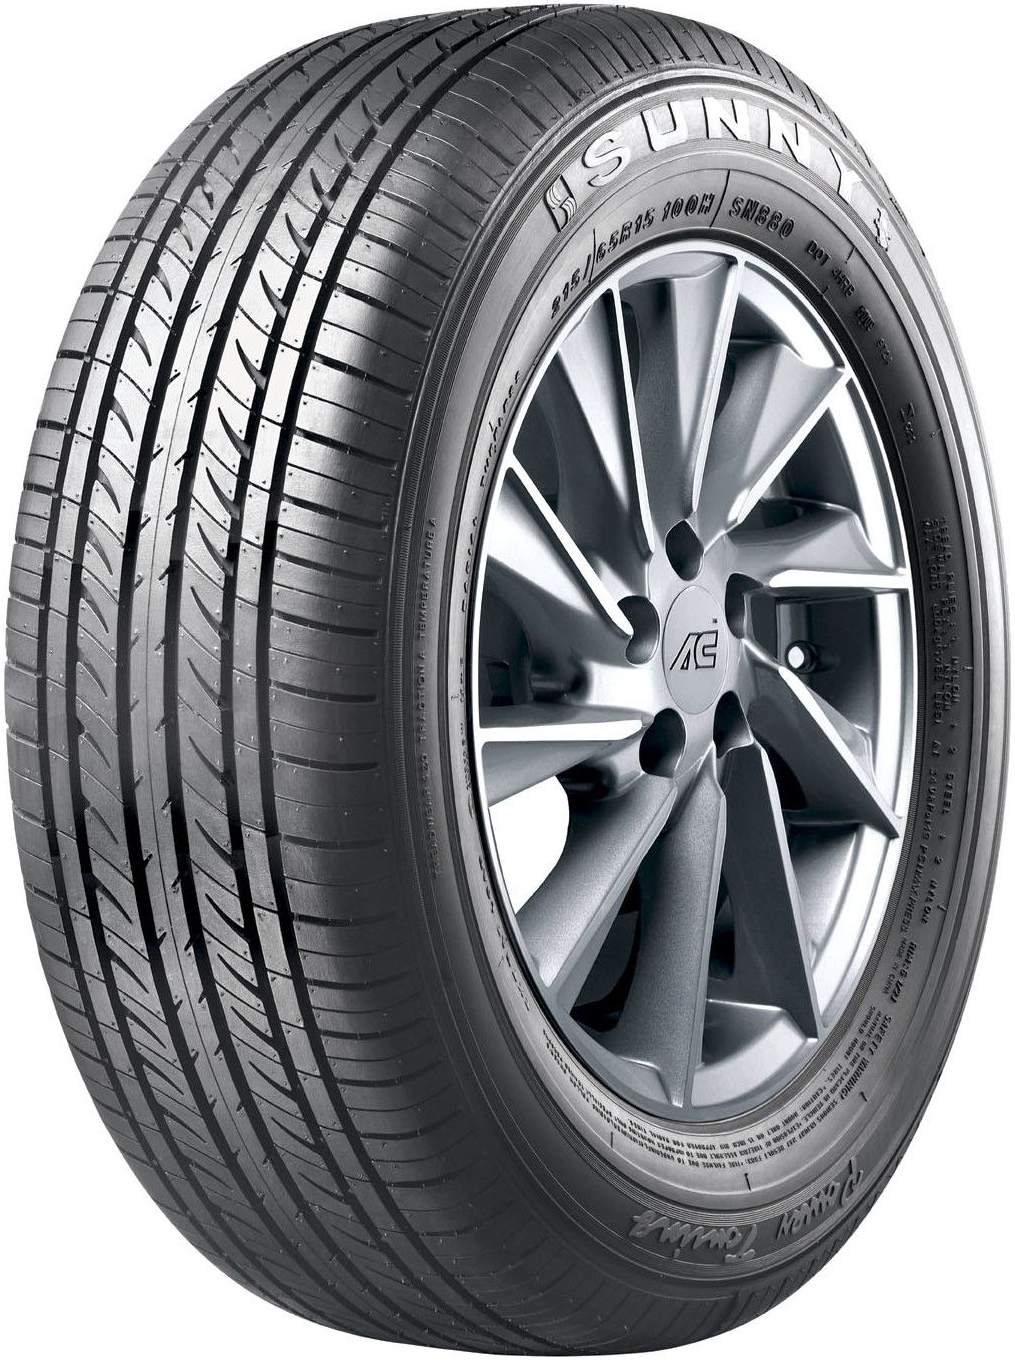 Anvelope auto SUNNY SN880 XL 215/60 R15 94H